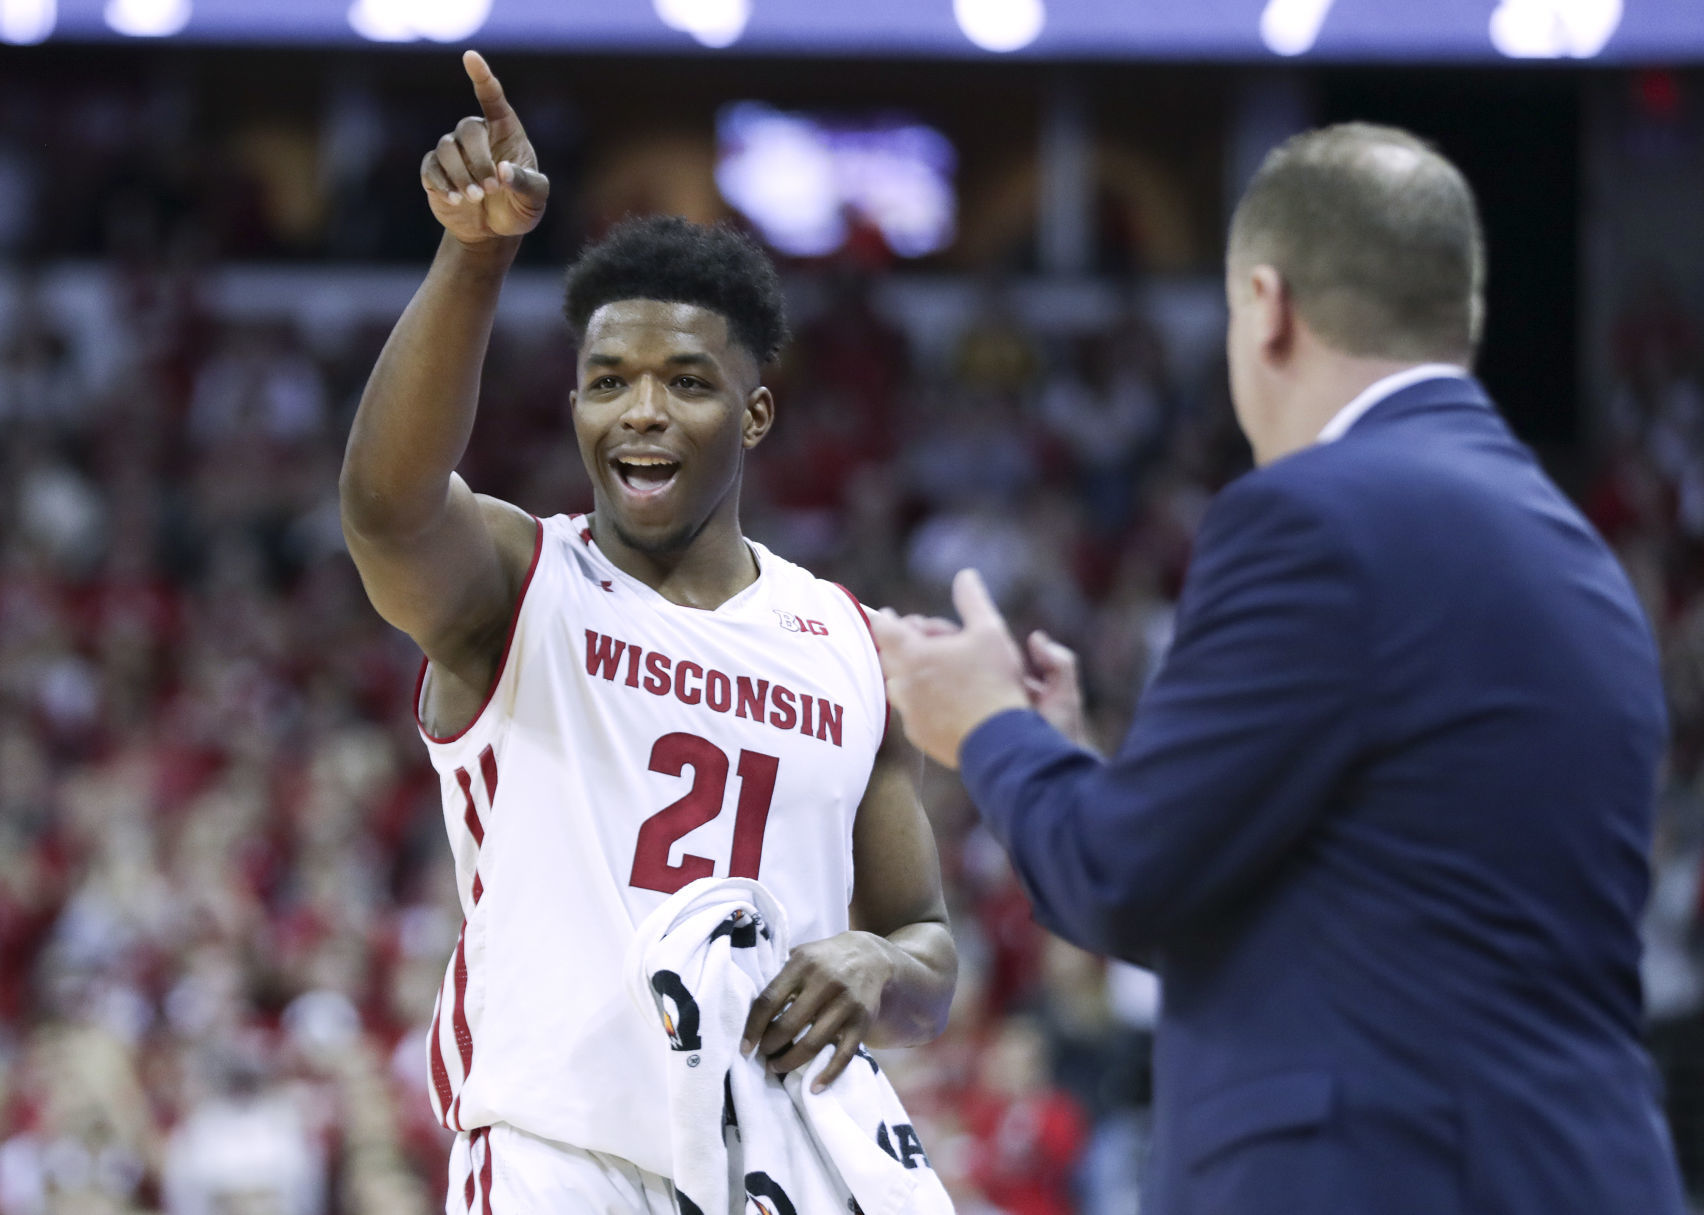 Khalil Iverson perseveres, now playing his best for Wisconsin Badgers